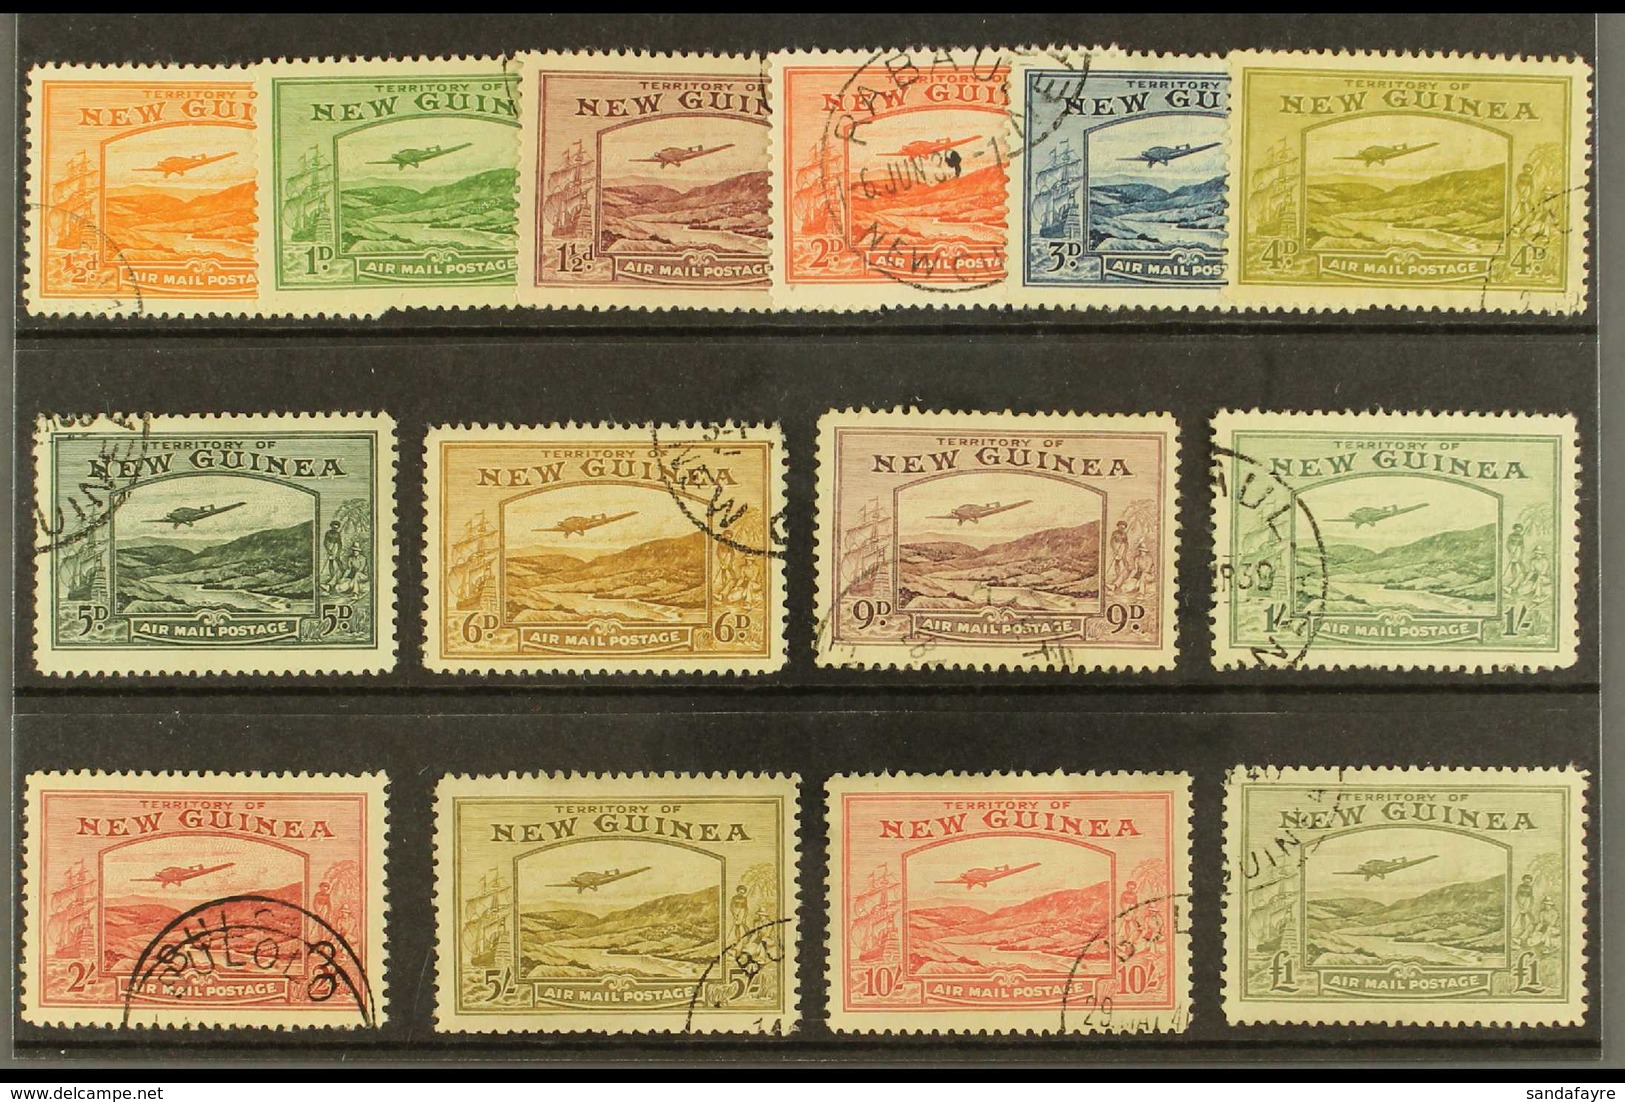 1939 Plane Over Goldfields Airmail Set Complete, SG 212/25, Good To Fine Used. 5s And 10s With Some Marginal Staining Ot - Papua Nuova Guinea